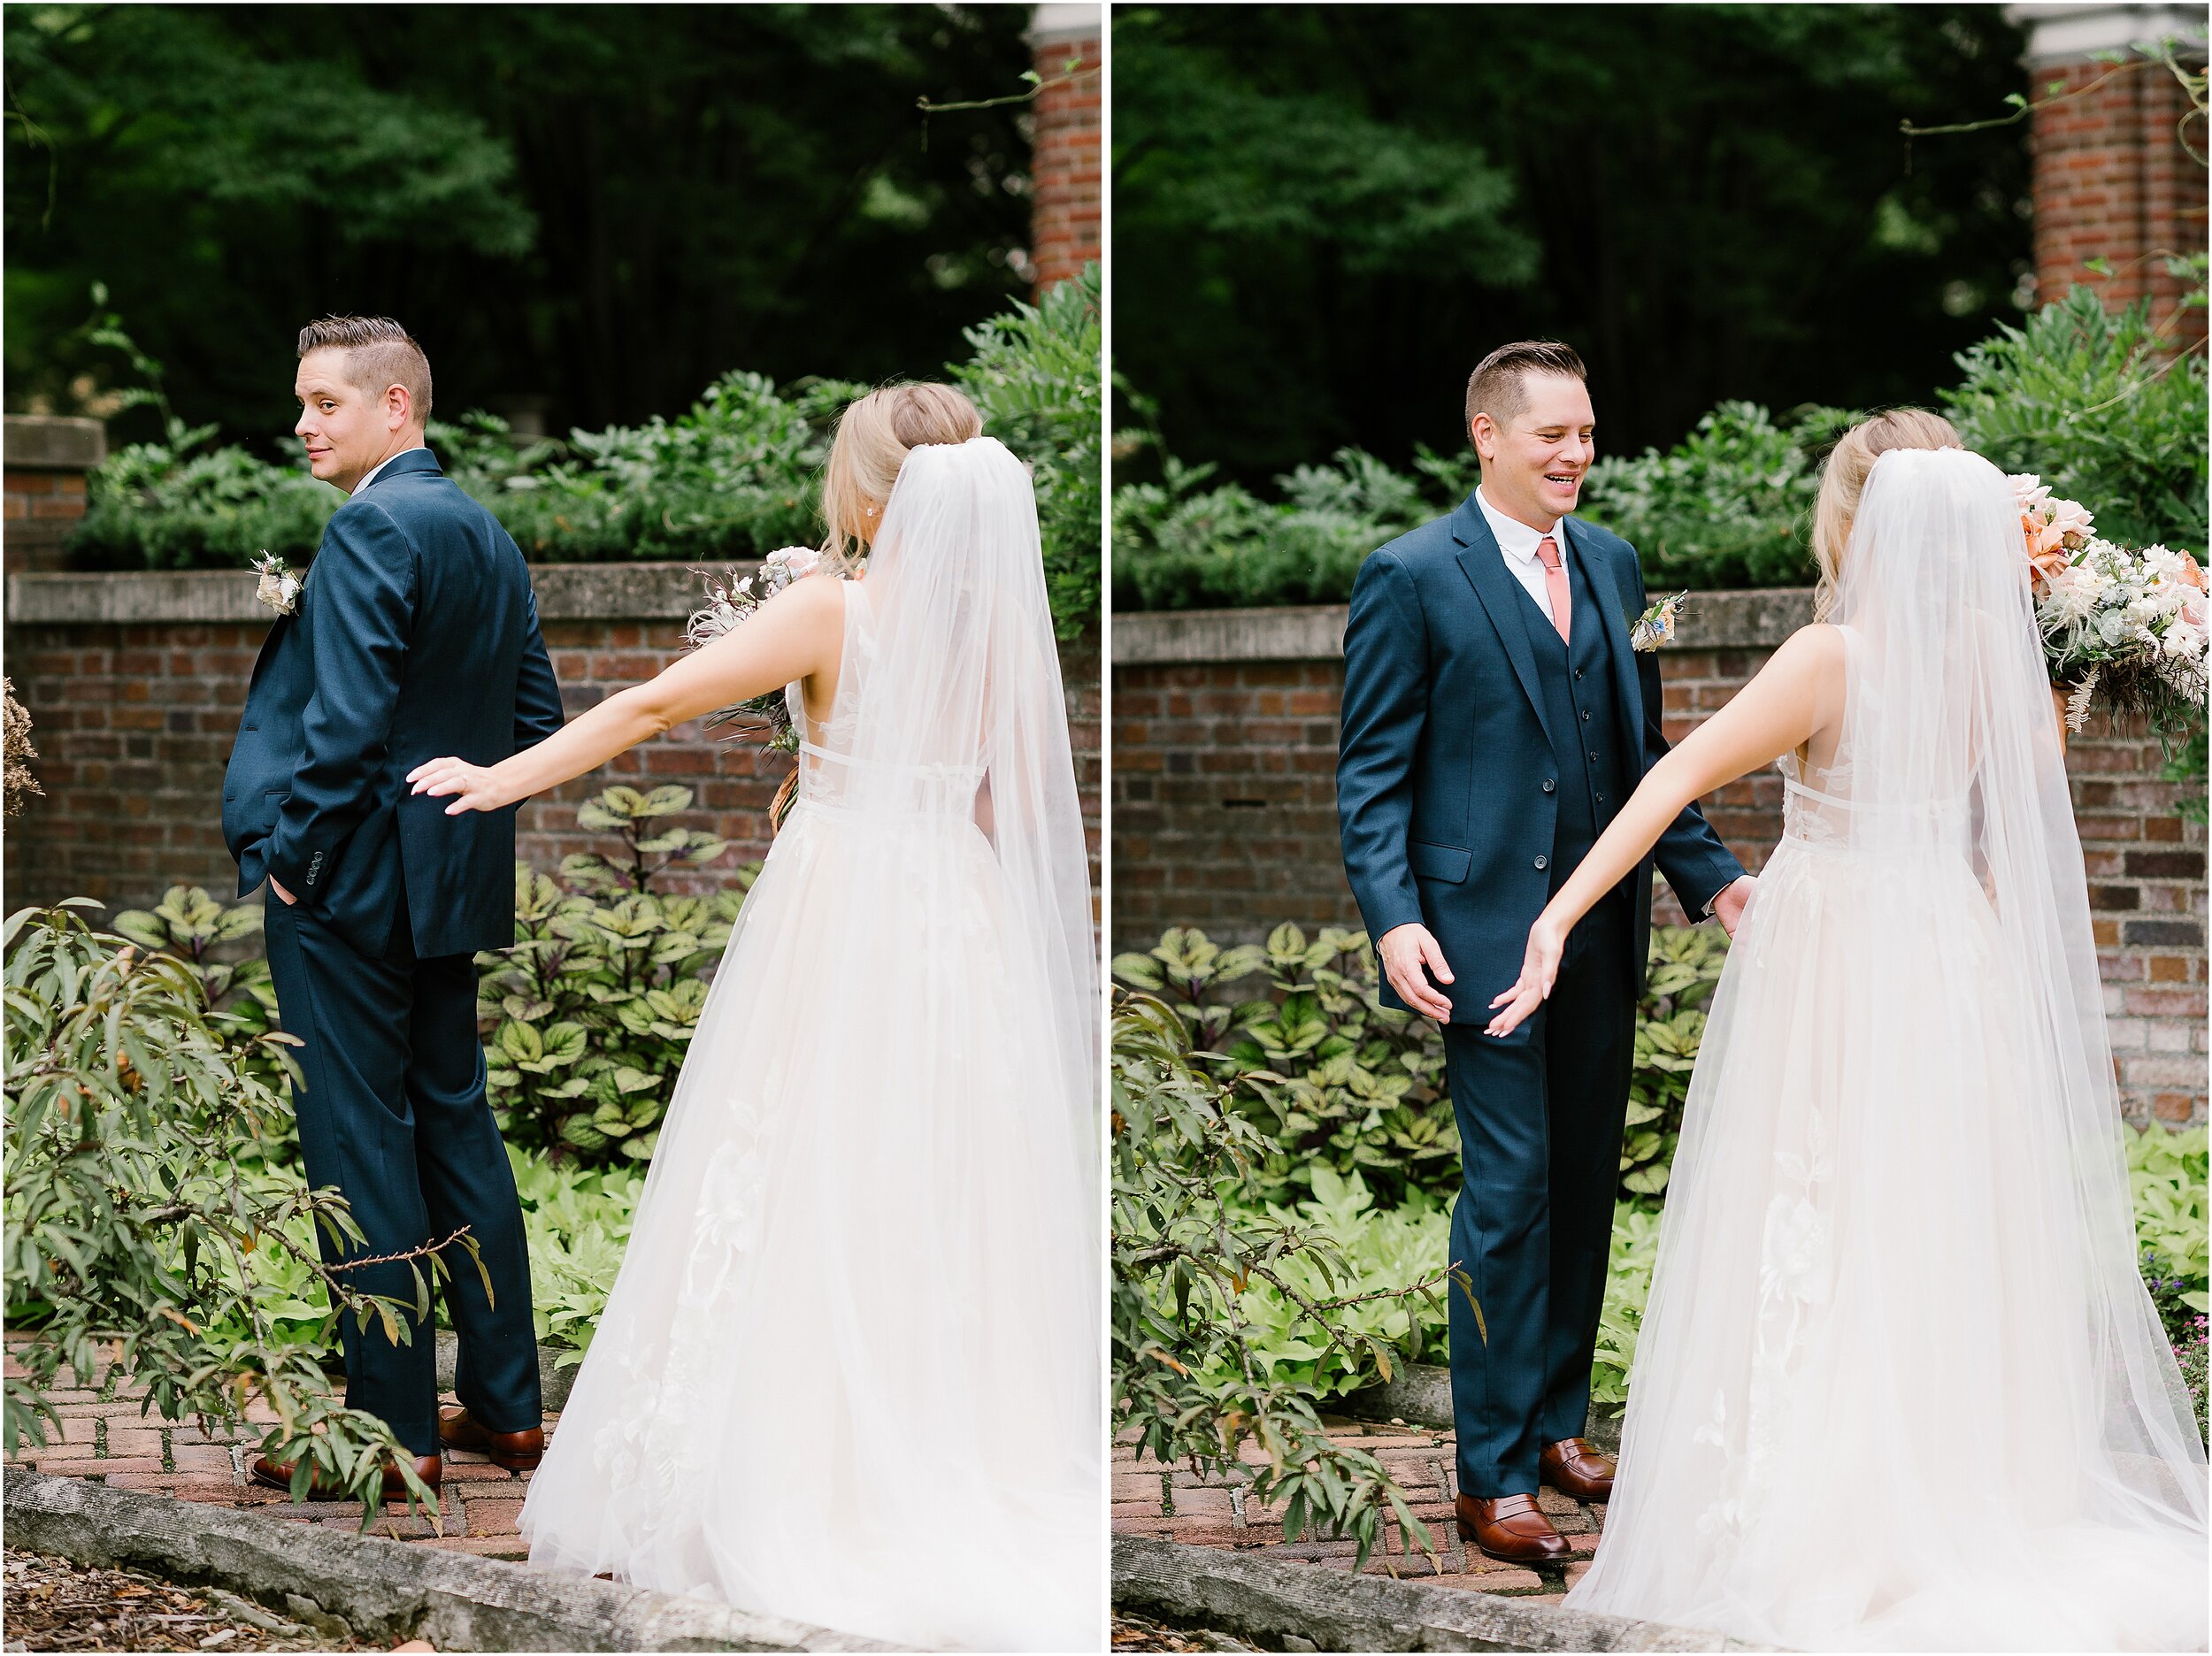 Rebecca Shehorn Photography Colleen and Kyle Inn at Irwin Gardens Wedding-180_The Commons Columbus Inn at Irwin Garden Indianapolis Wedding Photographer.jpg